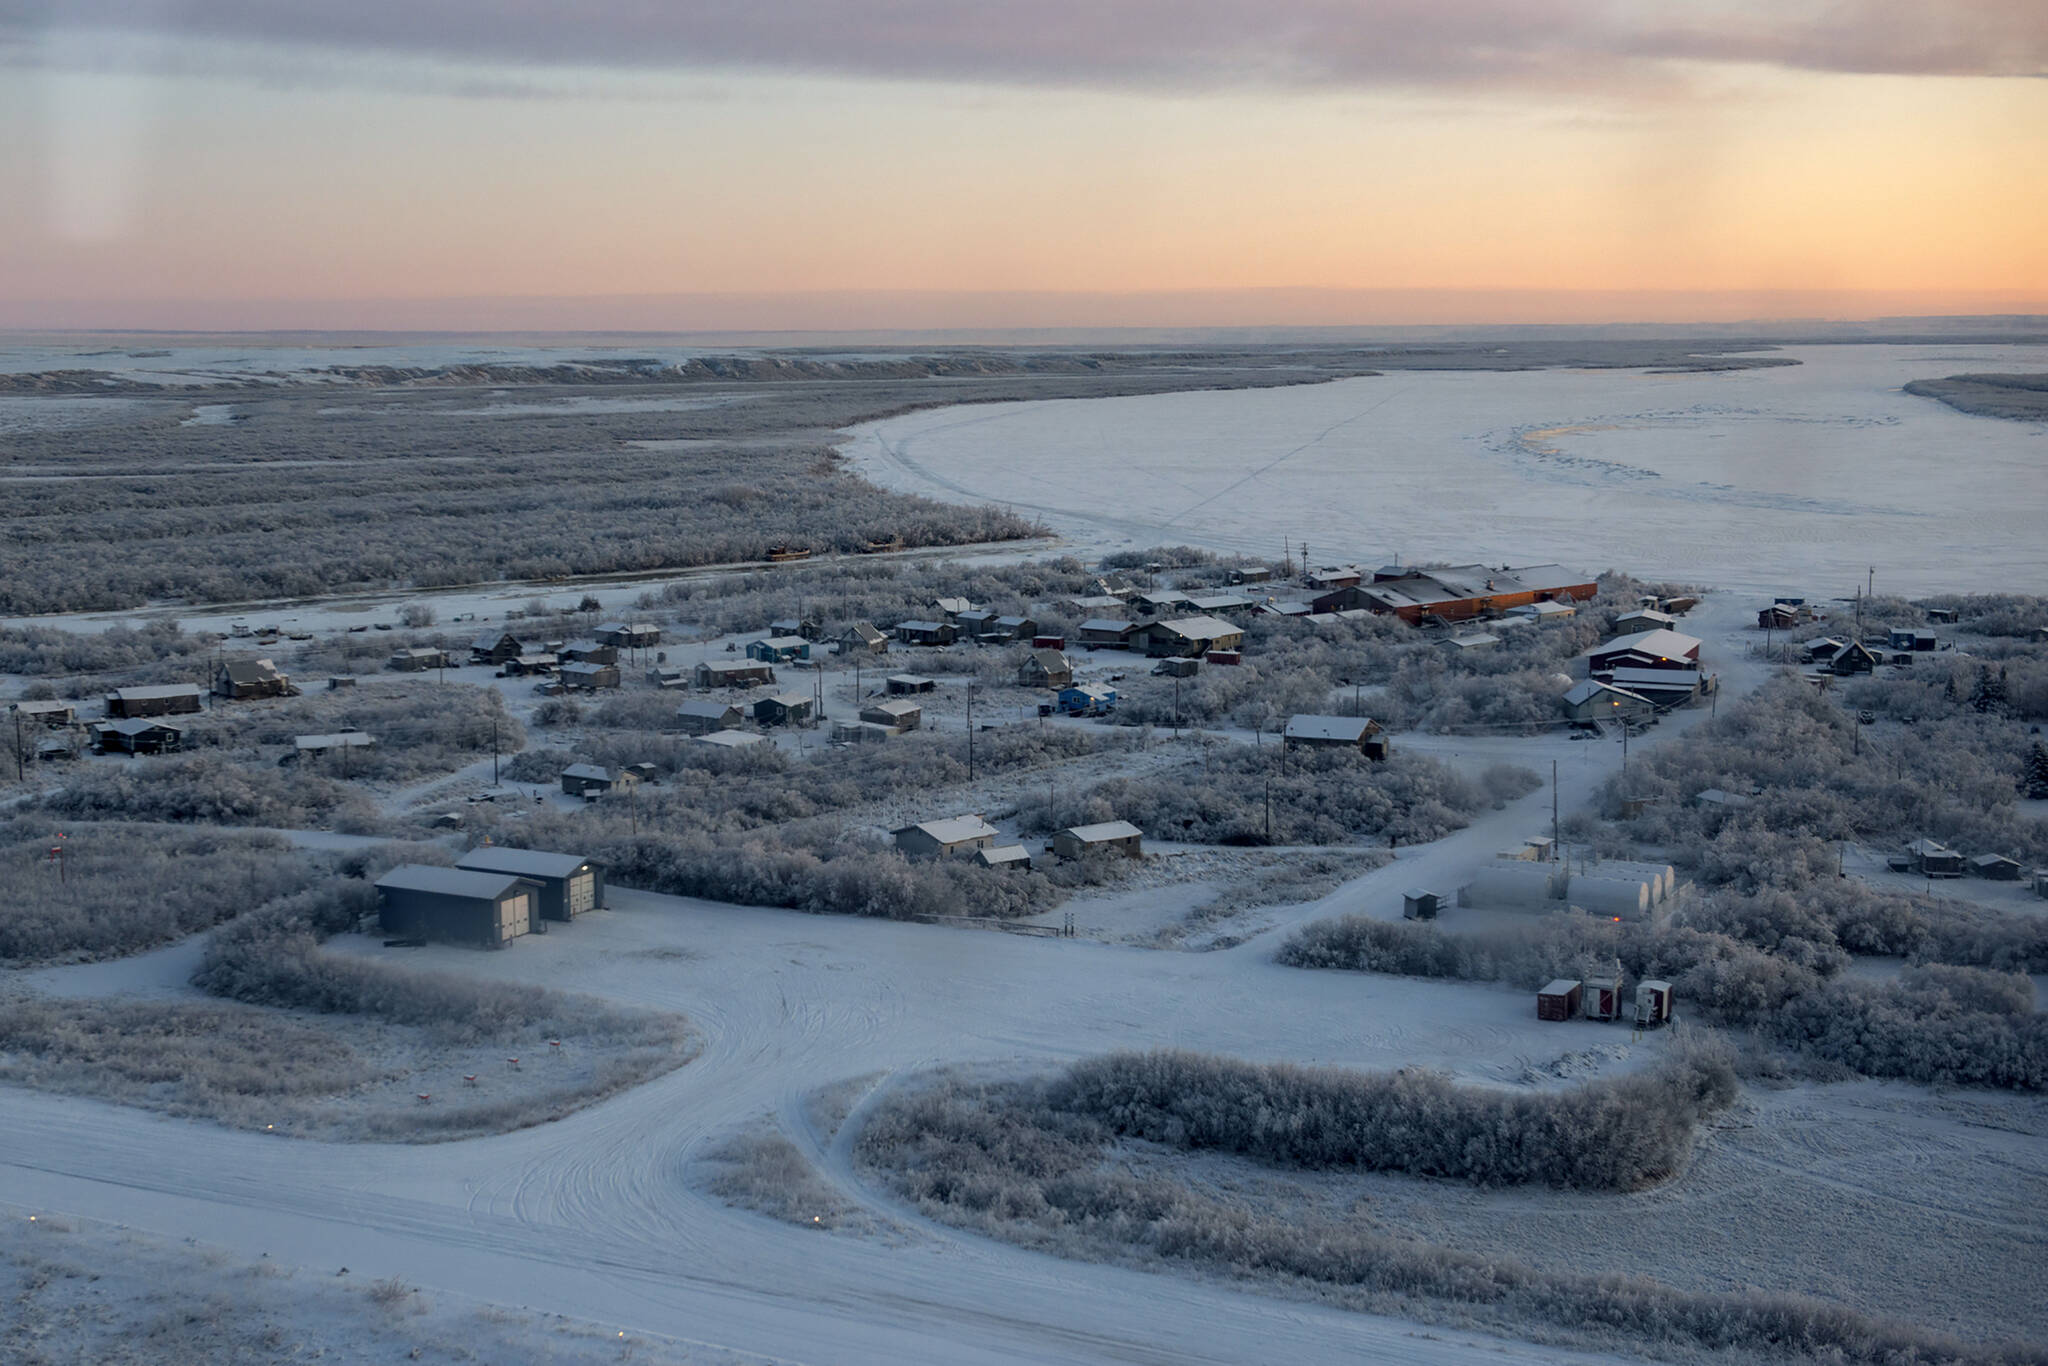 This photo provided by the U.S. Air Force/Alaska National Guard photo shows the William Miller Memorial School, larger structure top right, which is being severely eroded by the nearby Kuskokwim River in the village of Napakiak, Alaska, on Dec. 3, 2019. The school is just 64 feet (19.51 meters) from the Kuskokwim River, and it’s getting closer every year. Just two years ago, the school was less than 200 feet (60.96 meters) from the river. Climate change is a contributing factor in the erosion caused by the Kuskokwim, a river that becomes an ice highway for travelers in the winter. (Airman 1st Class Emily Farnsworth, U.S. Air Force/ Alaska National Guard)